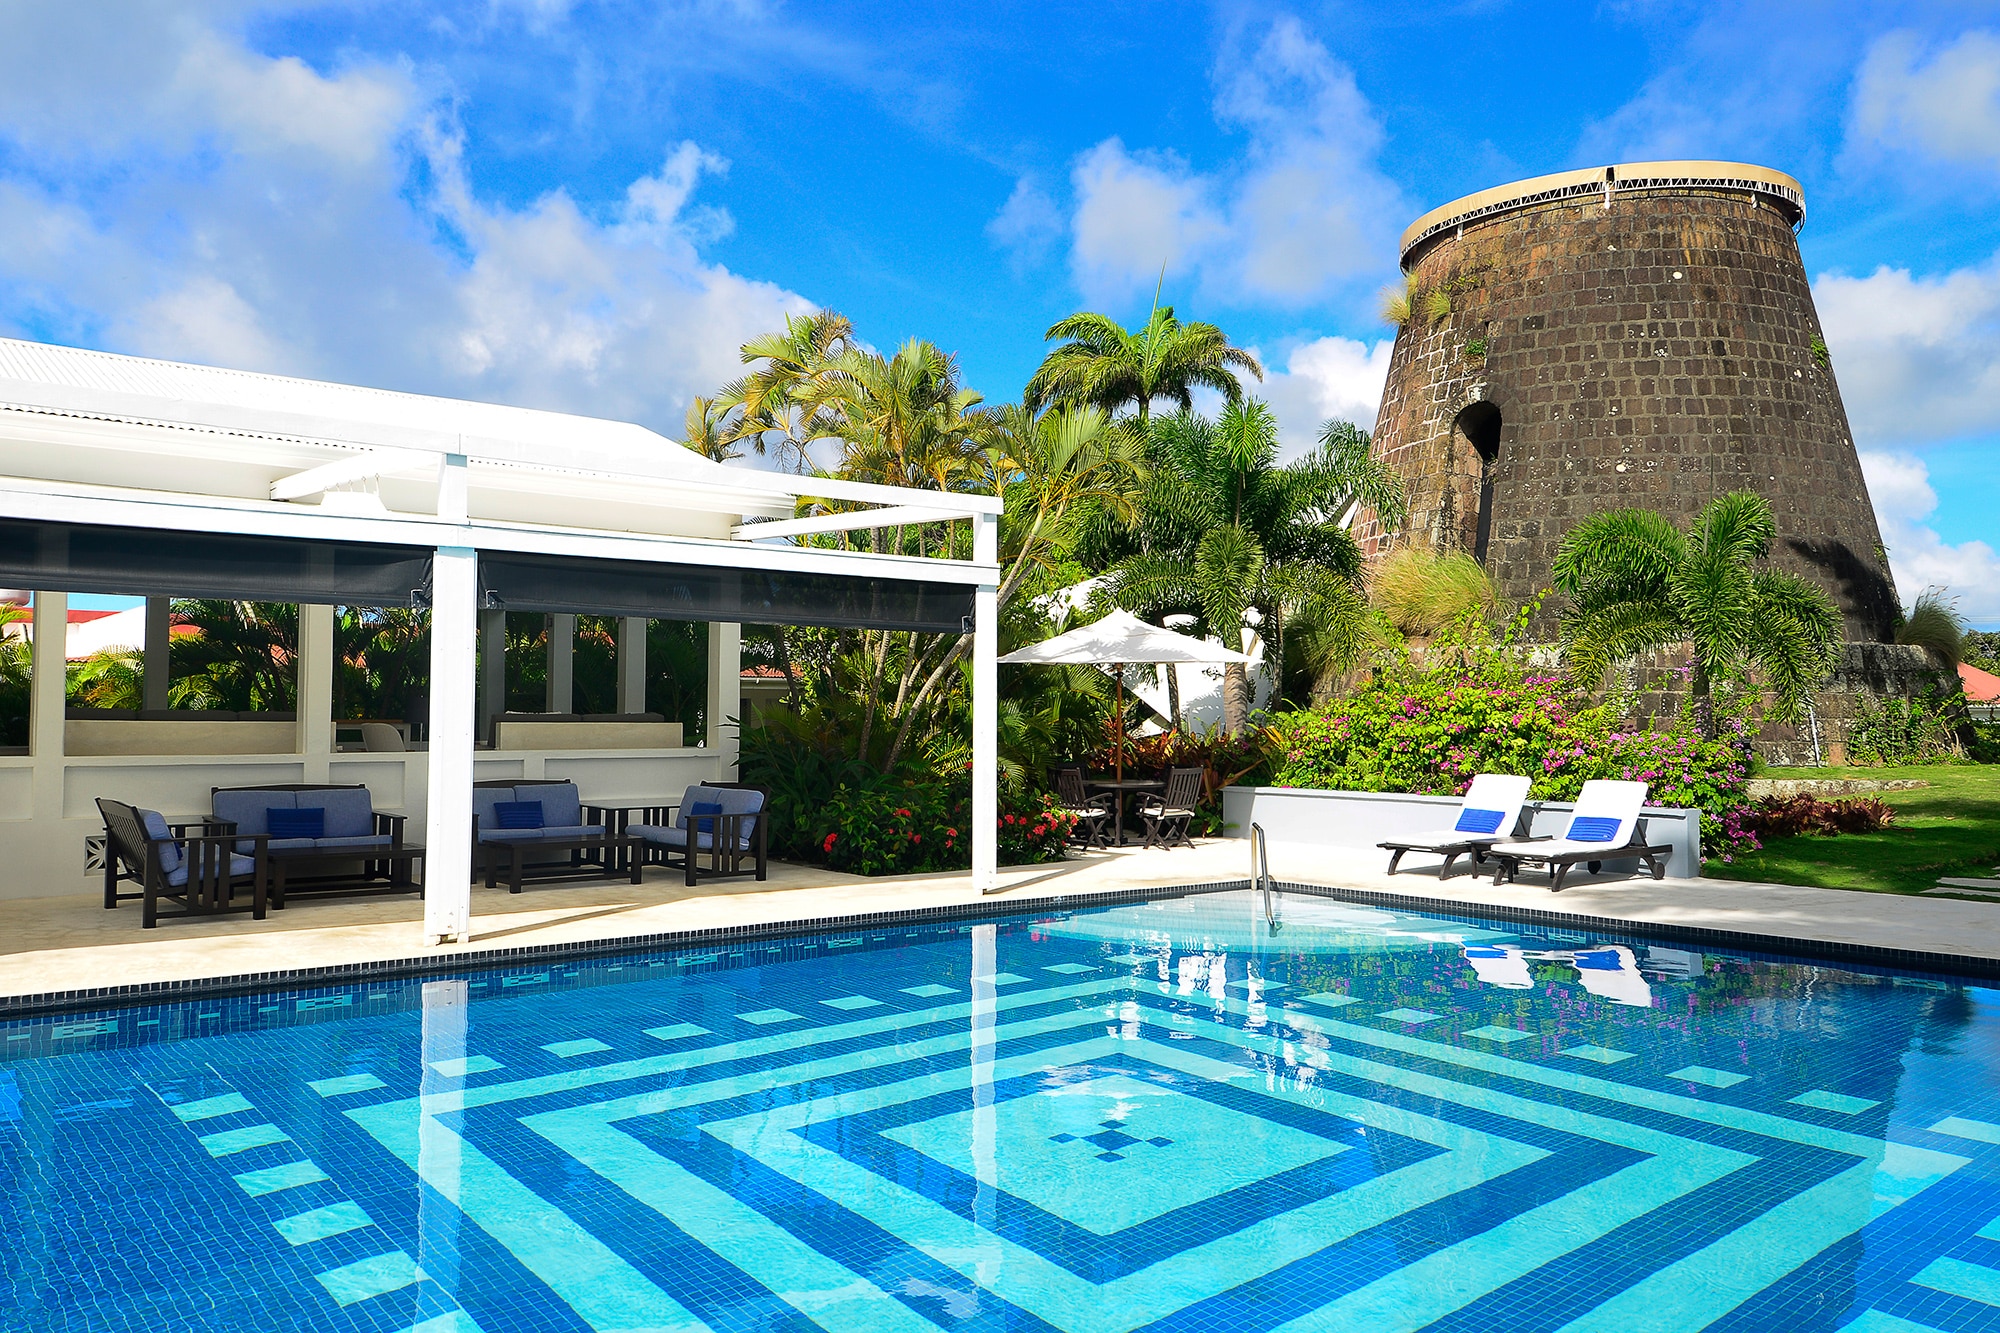 Best Hotels with Pools in the Caribbean: Montpelier Plantation & Beach